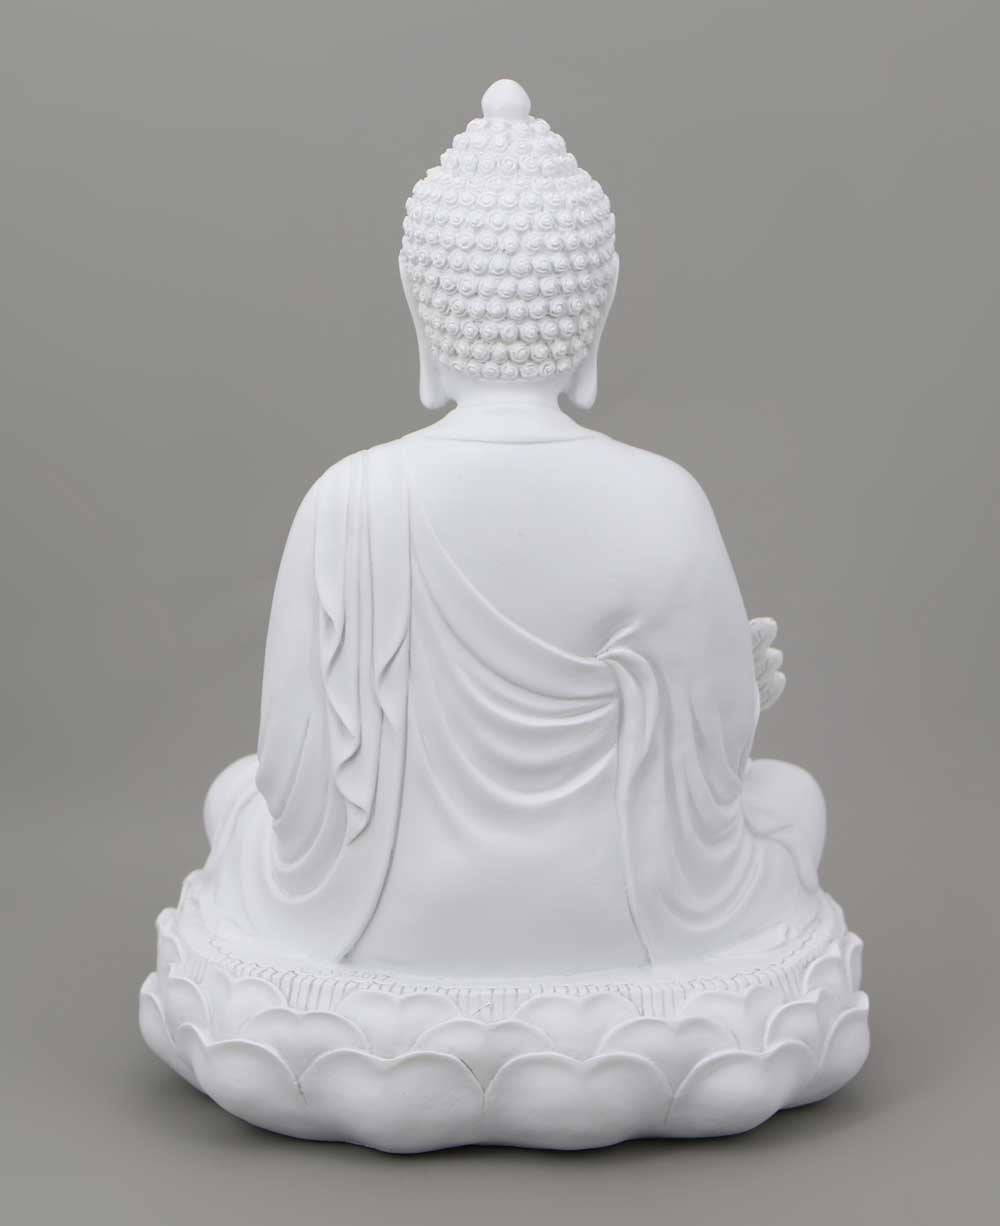 Healing White Medicine Buddha Statue, Indoor and Outdoor Use - Sculptures & Statues